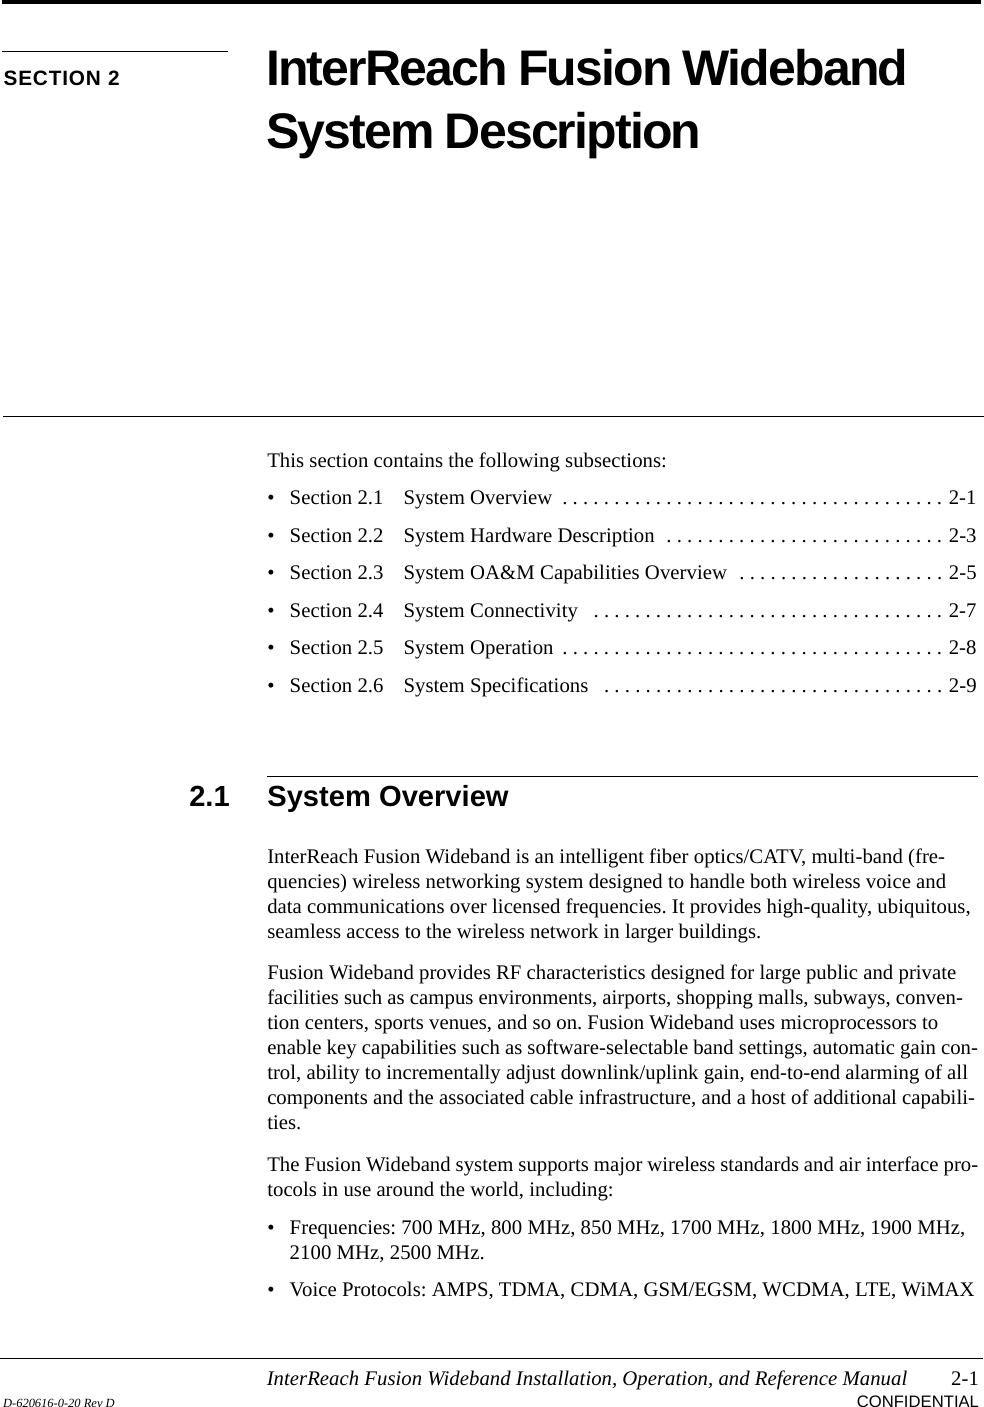 InterReach Fusion Wideband Installation, Operation, and Reference Manual 2-1D-620616-0-20 Rev D CONFIDENTIALSECTION 2 InterReach Fusion Wideband System DescriptionThis section contains the following subsections:• Section 2.1   System Overview  . . . . . . . . . . . . . . . . . . . . . . . . . . . . . . . . . . . . . 2-1• Section 2.2   System Hardware Description  . . . . . . . . . . . . . . . . . . . . . . . . . . . 2-3• Section 2.3   System OA&amp;M Capabilities Overview  . . . . . . . . . . . . . . . . . . . . 2-5• Section 2.4   System Connectivity   . . . . . . . . . . . . . . . . . . . . . . . . . . . . . . . . . . 2-7• Section 2.5   System Operation  . . . . . . . . . . . . . . . . . . . . . . . . . . . . . . . . . . . . . 2-8• Section 2.6   System Specifications   . . . . . . . . . . . . . . . . . . . . . . . . . . . . . . . . . 2-92.1 System OverviewInterReach Fusion Wideband is an intelligent fiber optics/CATV, multi-band (fre-quencies) wireless networking system designed to handle both wireless voice and data communications over licensed frequencies. It provides high-quality, ubiquitous, seamless access to the wireless network in larger buildings.Fusion Wideband provides RF characteristics designed for large public and private facilities such as campus environments, airports, shopping malls, subways, conven-tion centers, sports venues, and so on. Fusion Wideband uses microprocessors to enable key capabilities such as software-selectable band settings, automatic gain con-trol, ability to incrementally adjust downlink/uplink gain, end-to-end alarming of all components and the associated cable infrastructure, and a host of additional capabili-ties.The Fusion Wideband system supports major wireless standards and air interface pro-tocols in use around the world, including:• Frequencies: 700 MHz, 800 MHz, 850 MHz, 1700 MHz, 1800 MHz, 1900 MHz, 2100 MHz, 2500 MHz.• Voice Protocols: AMPS, TDMA, CDMA, GSM/EGSM, WCDMA, LTE, WiMAX